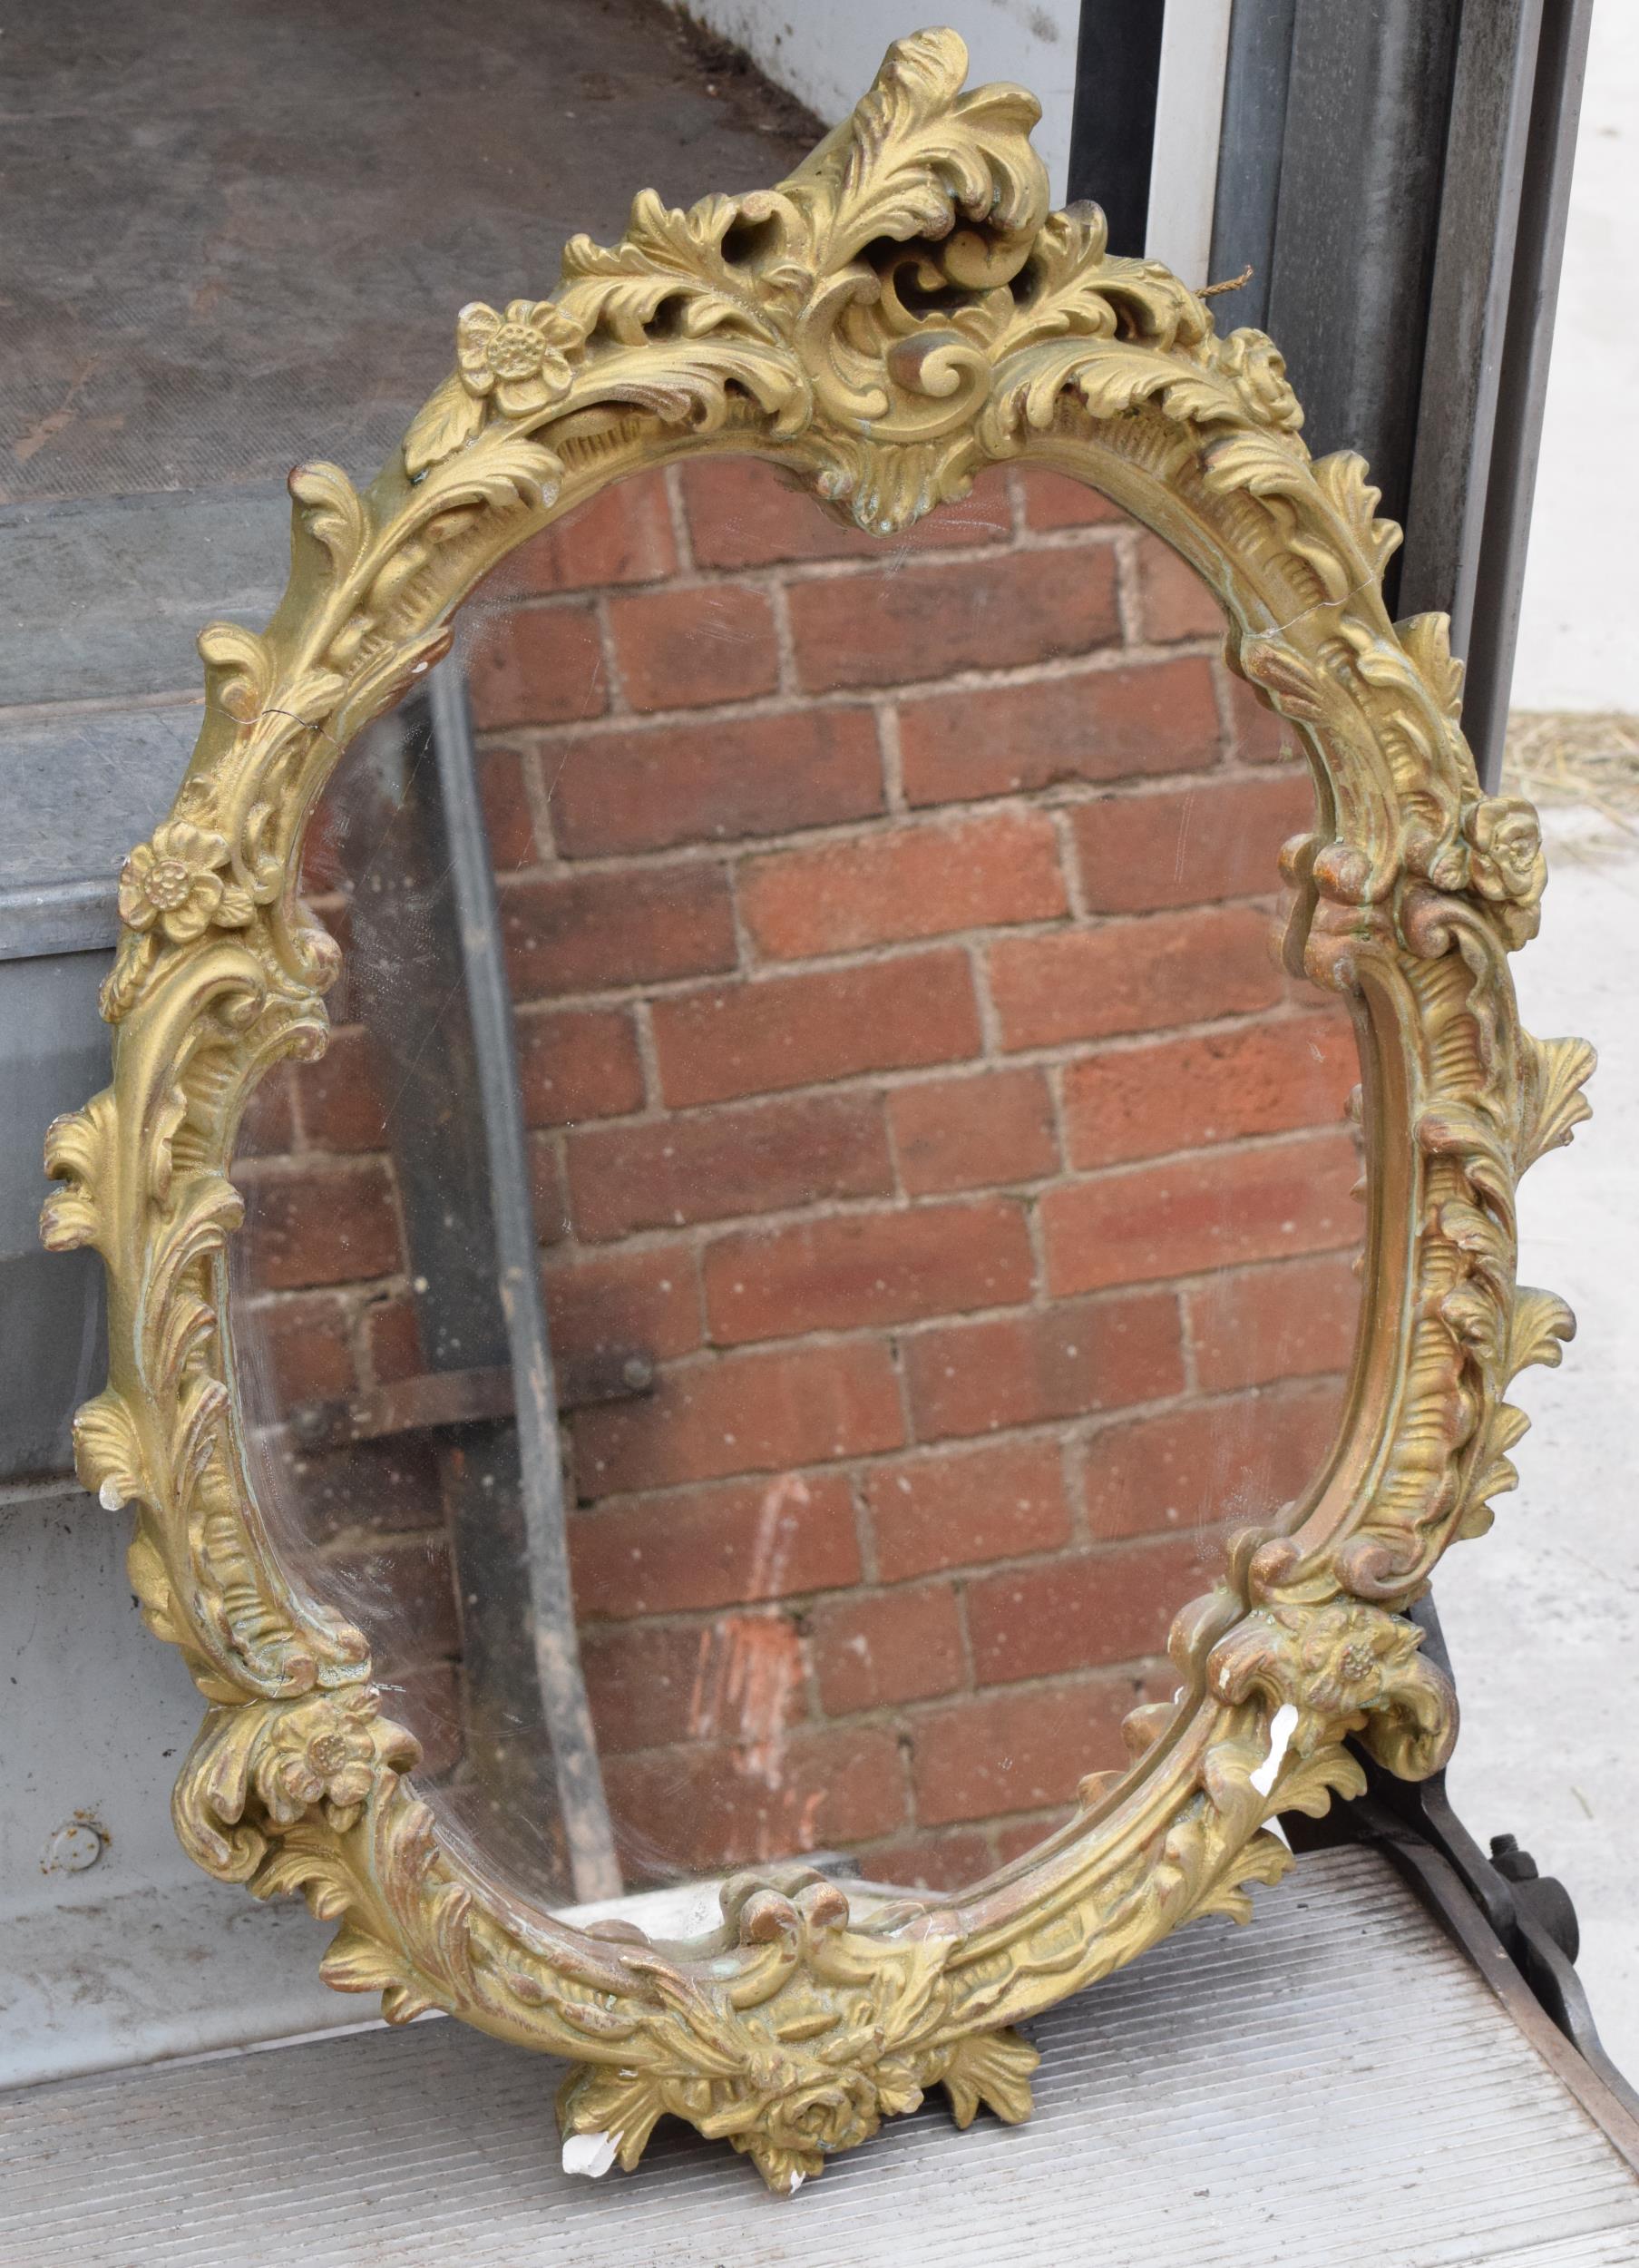 A mid 20th century gilt-style plaster mirror, 67cm tall. In good functional condition with some